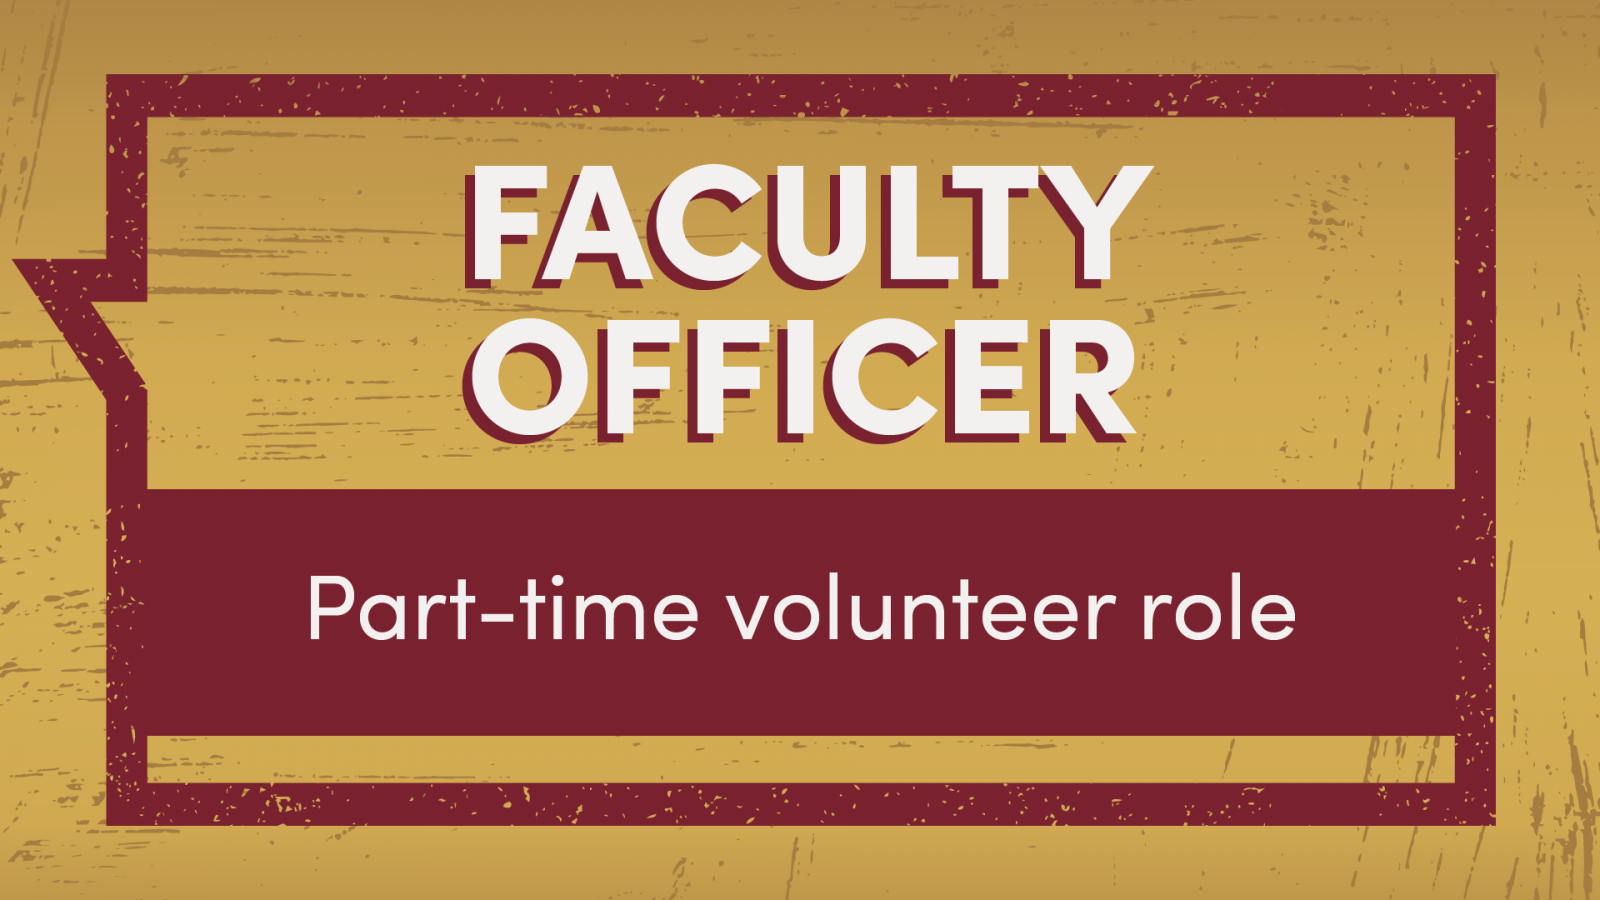 Open the Faculty Officer role profile PDF